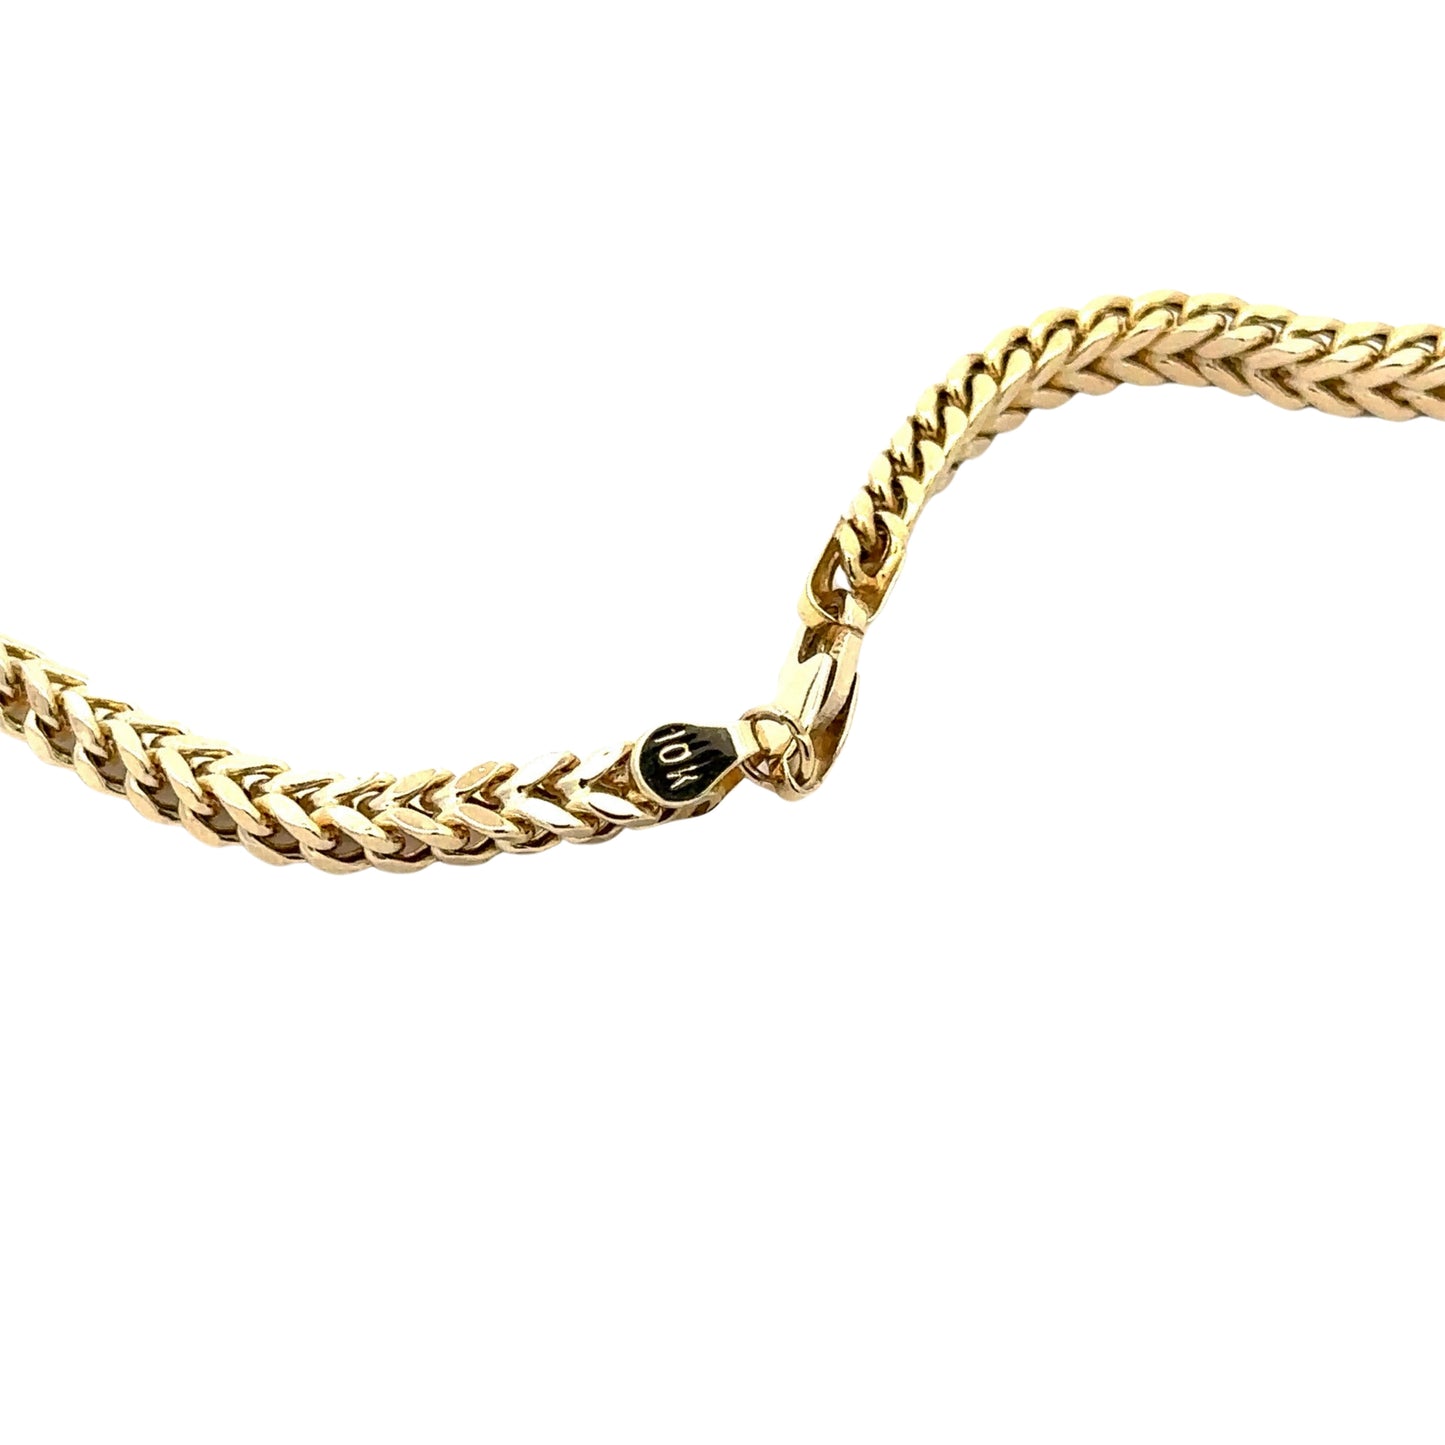 10K lobster clasp on chain